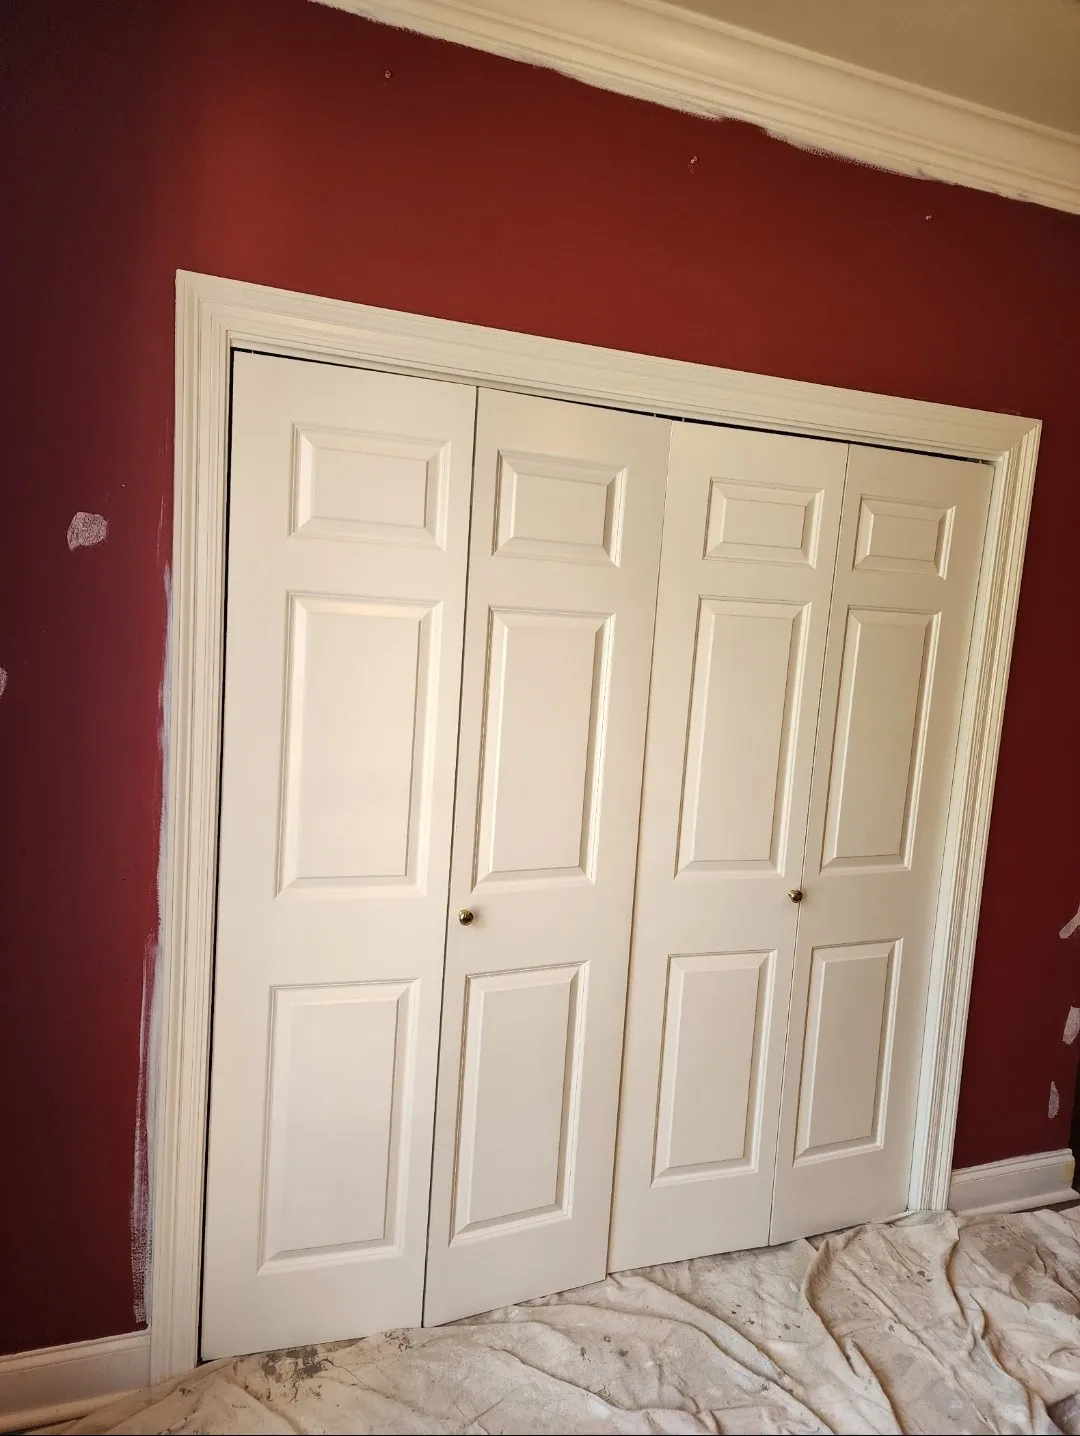 Interior Painting for All South Painting in Erath, LA